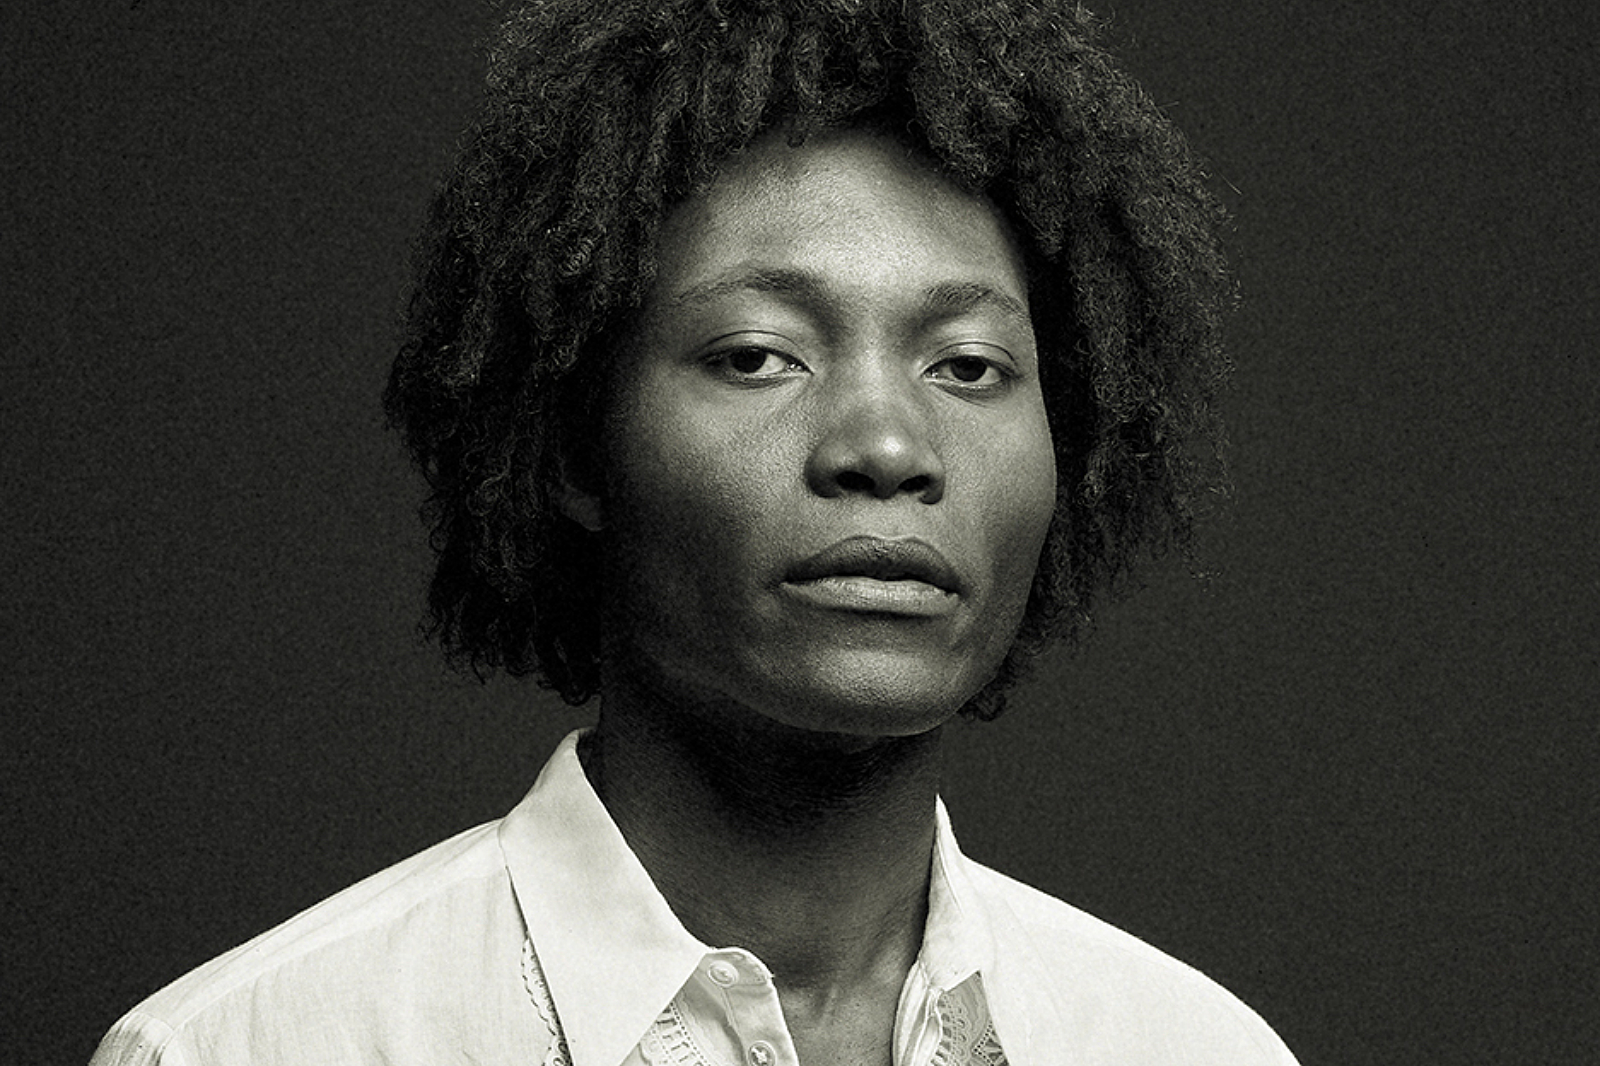 Benjamin Clementine shares new single 'Delighted'